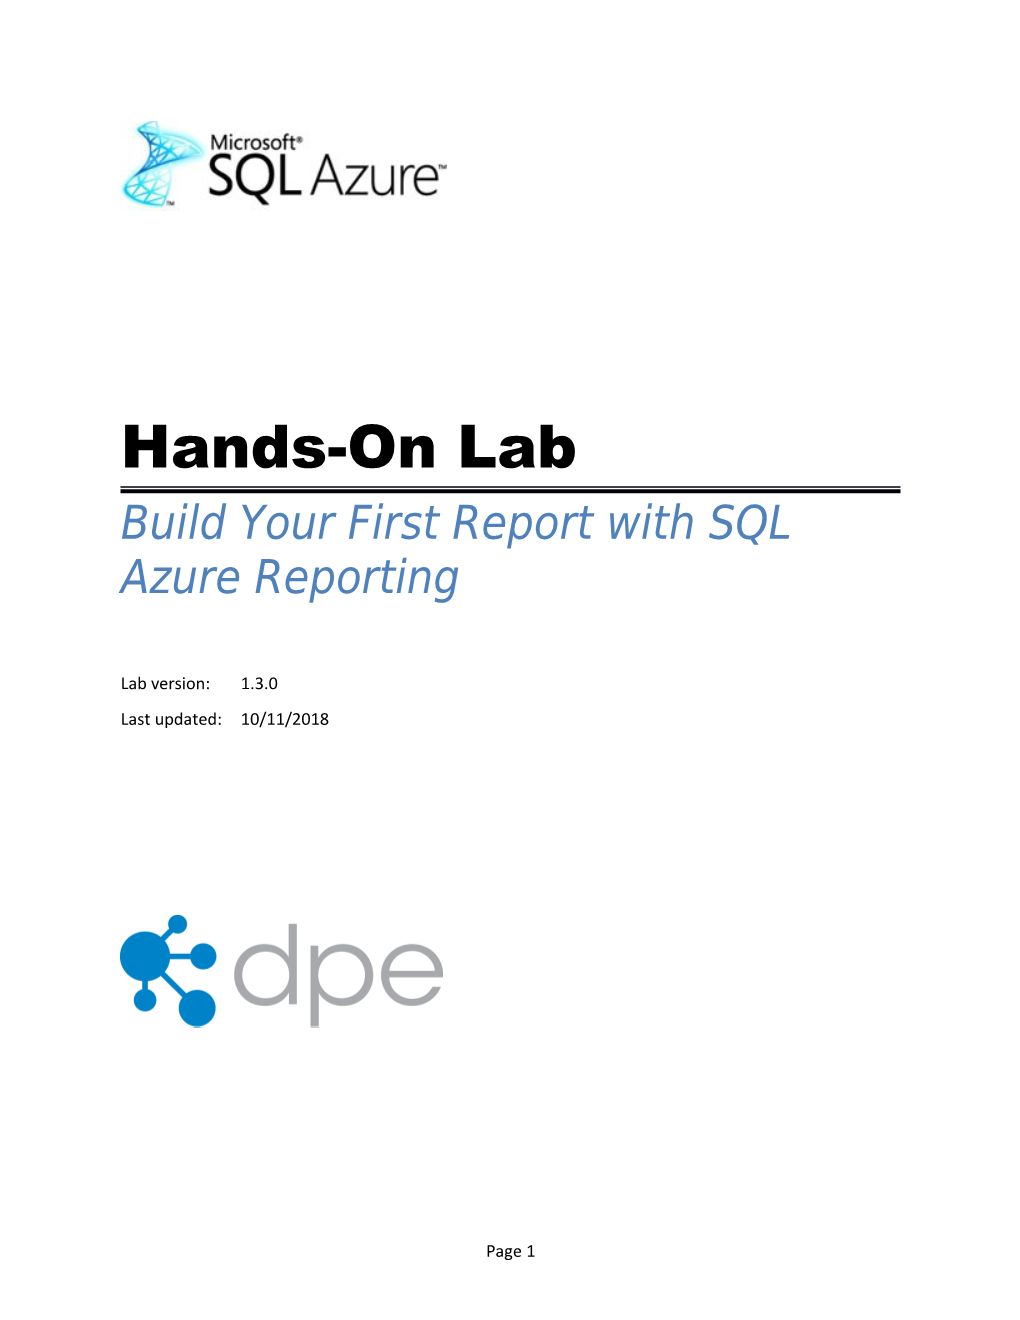 Introduction to SQL Azure Reporting Services